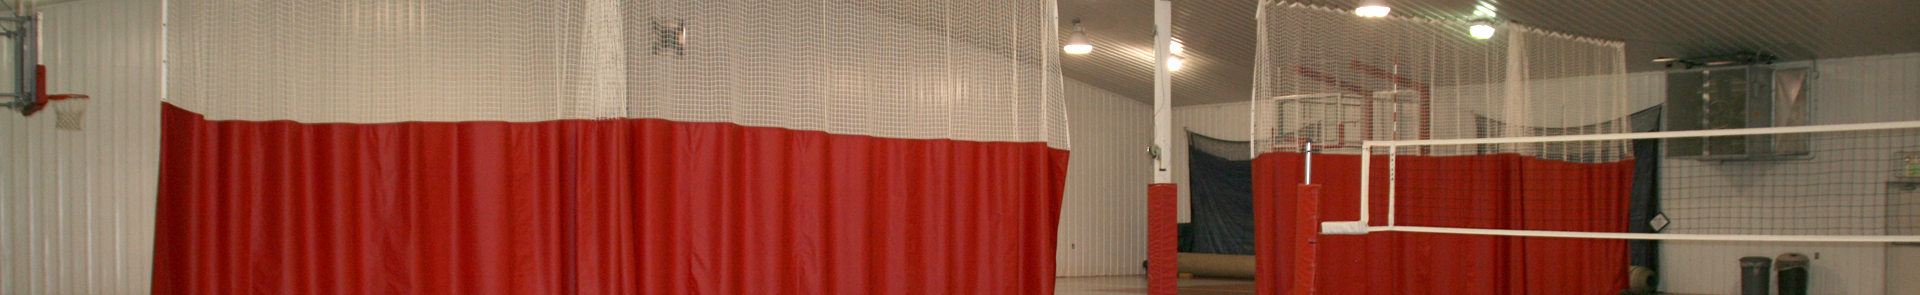 Indoor Courts Divider Curtains